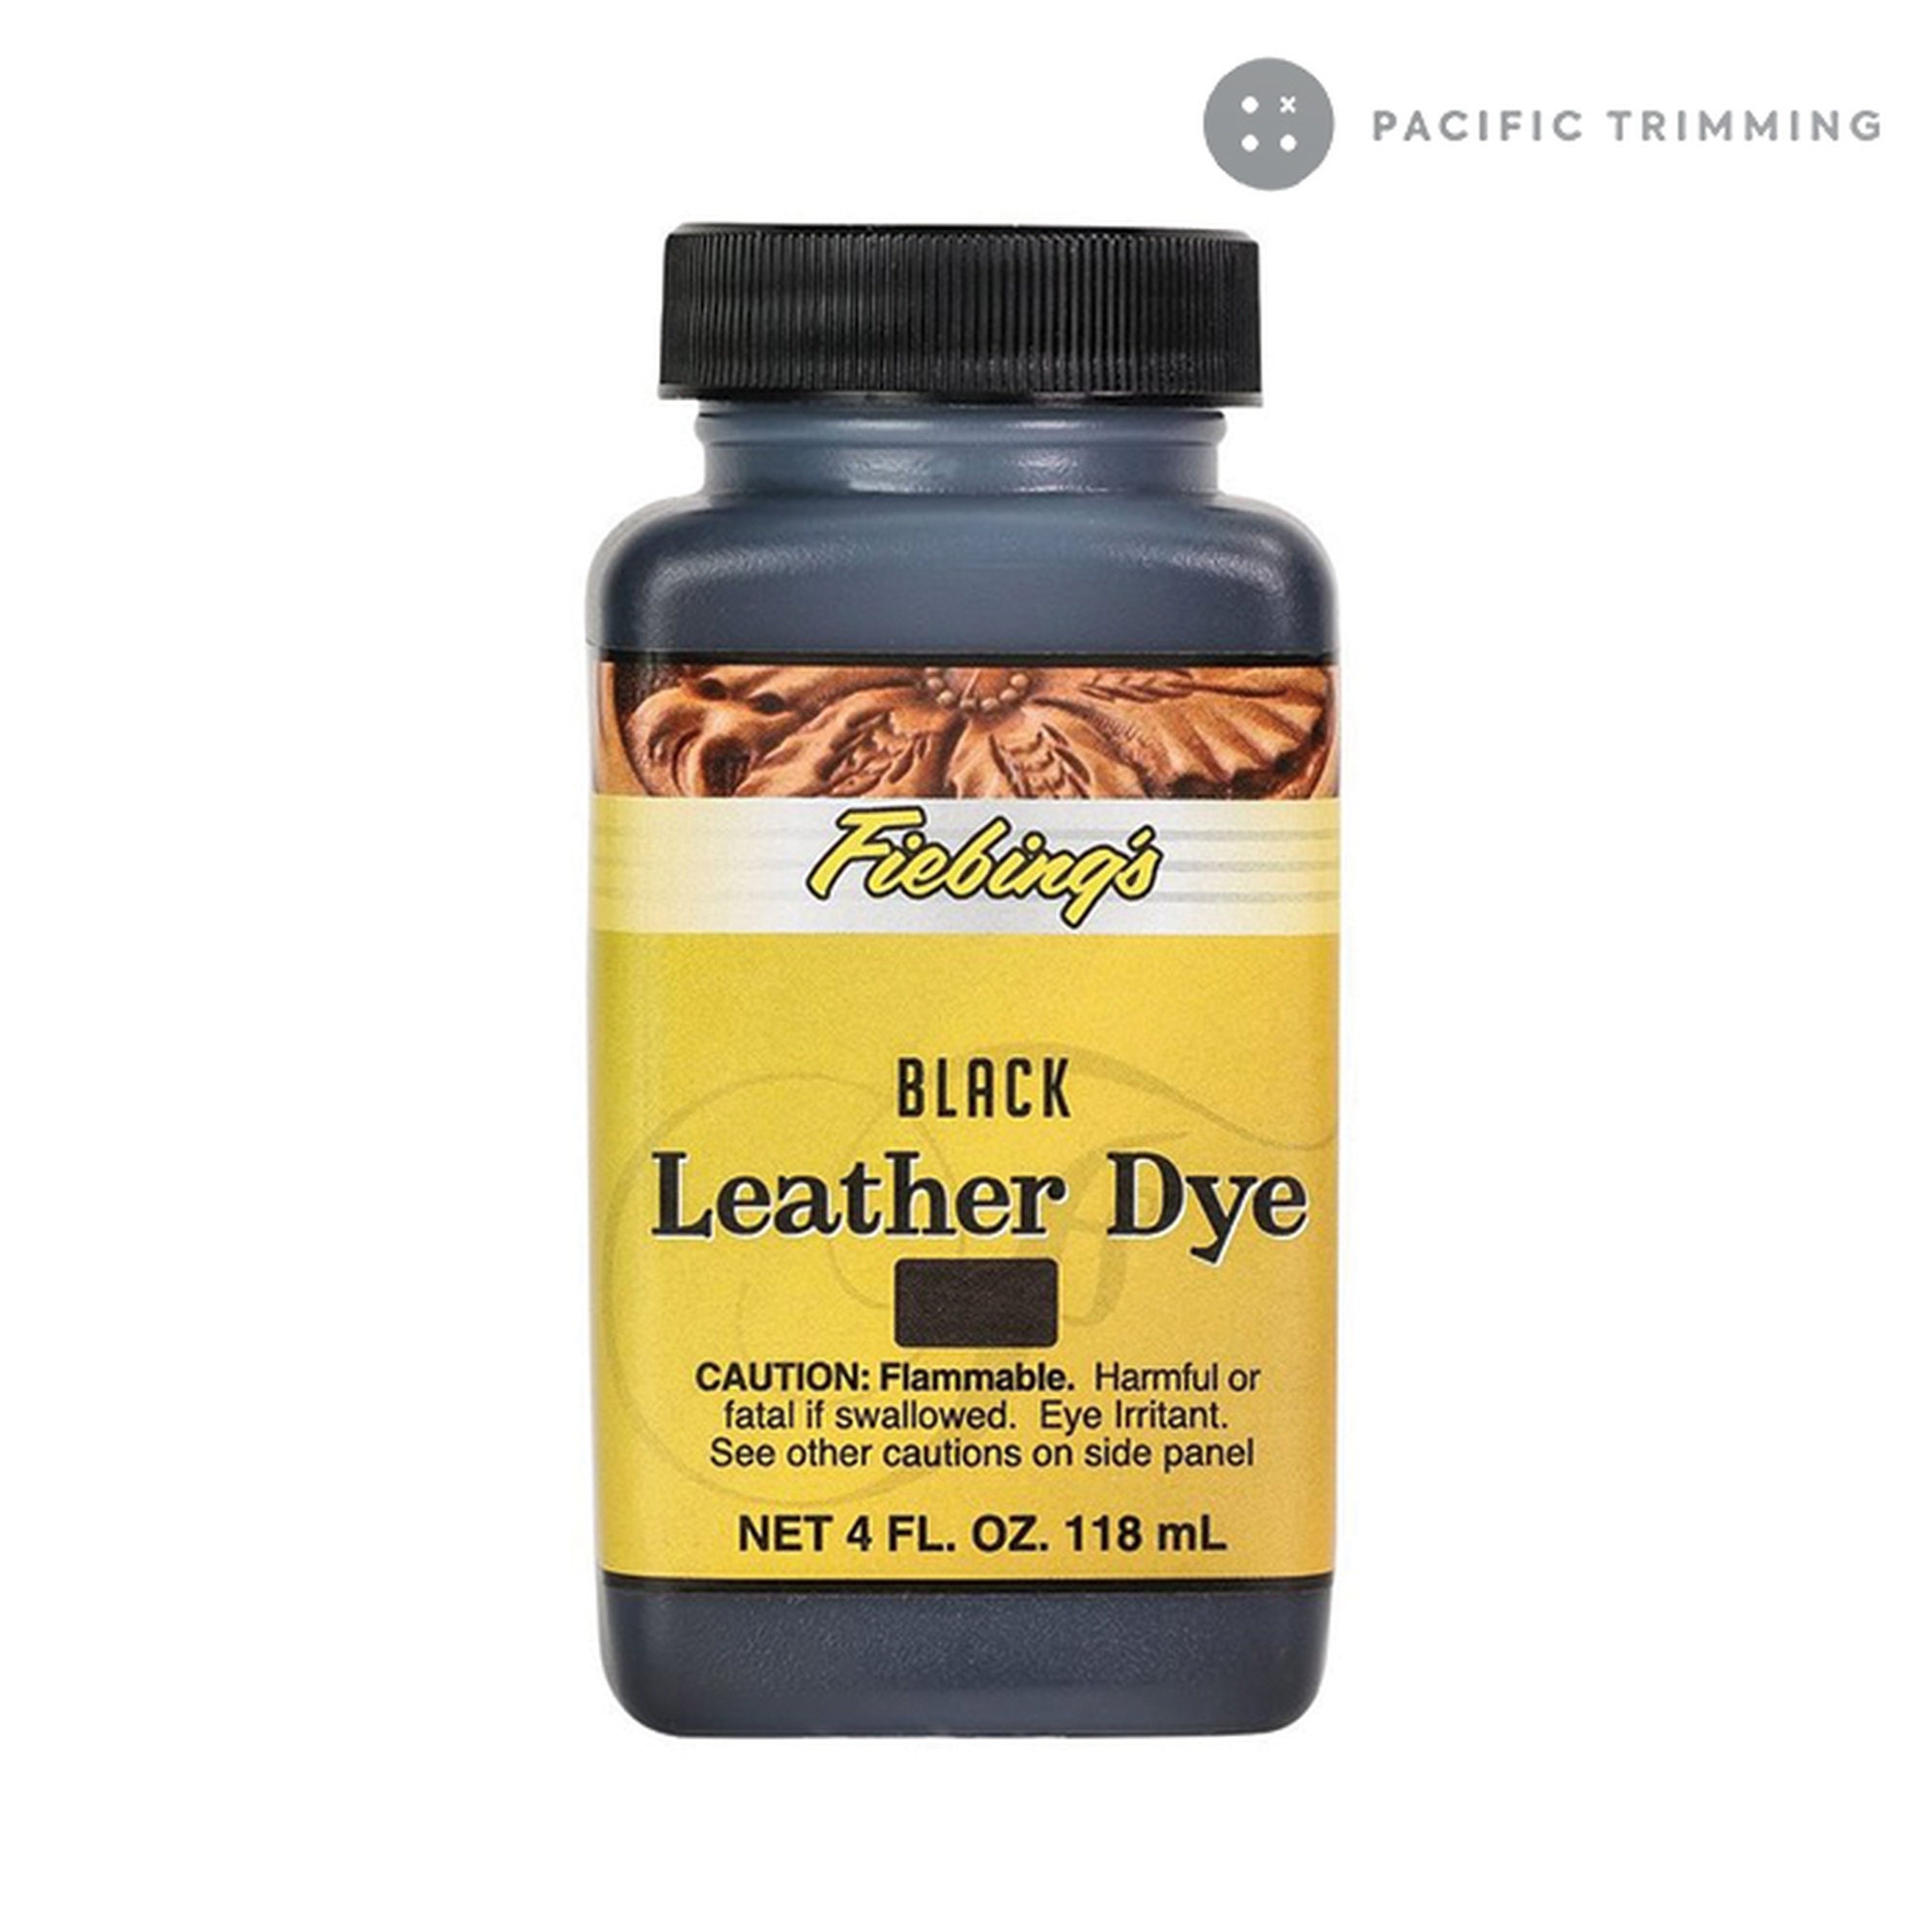 Black Penetrating Dye for leather and synthetic shoes, purses, bags